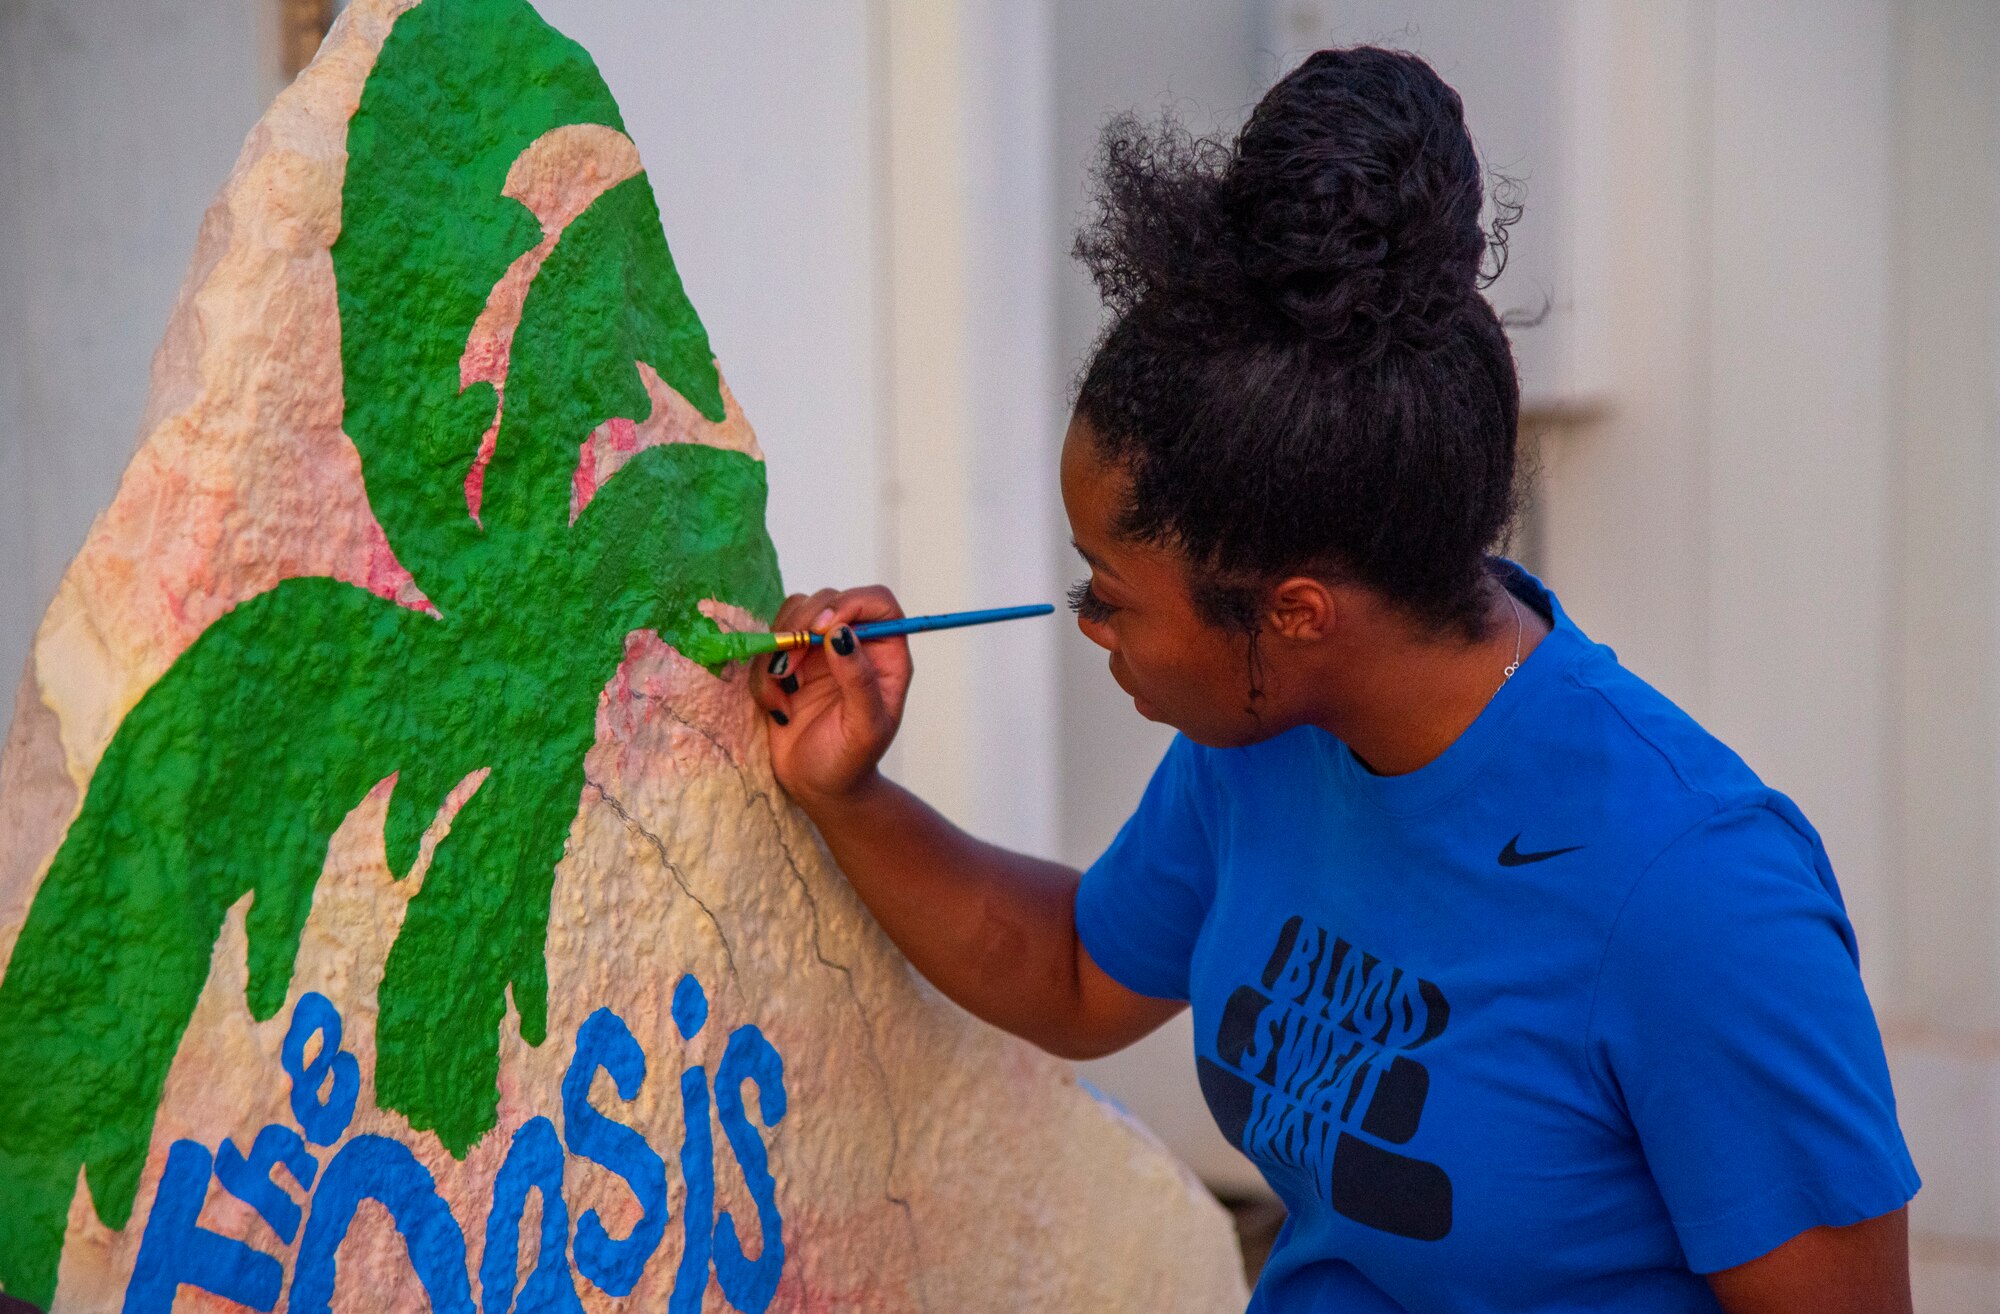 Staff Sgt. Jasmin Walker, 332d Wing Special Agencies, repaints a decorative rock mural in front of the Oasis at an undisclosed location in Southwest Asia, Sept. 4, 2022. The Oasis is a volunteer-run quiet area where Airmen can relax with snacks and other amenities. (U.S. Air Force photo by: Tech. Sgt. Jim Bentley)